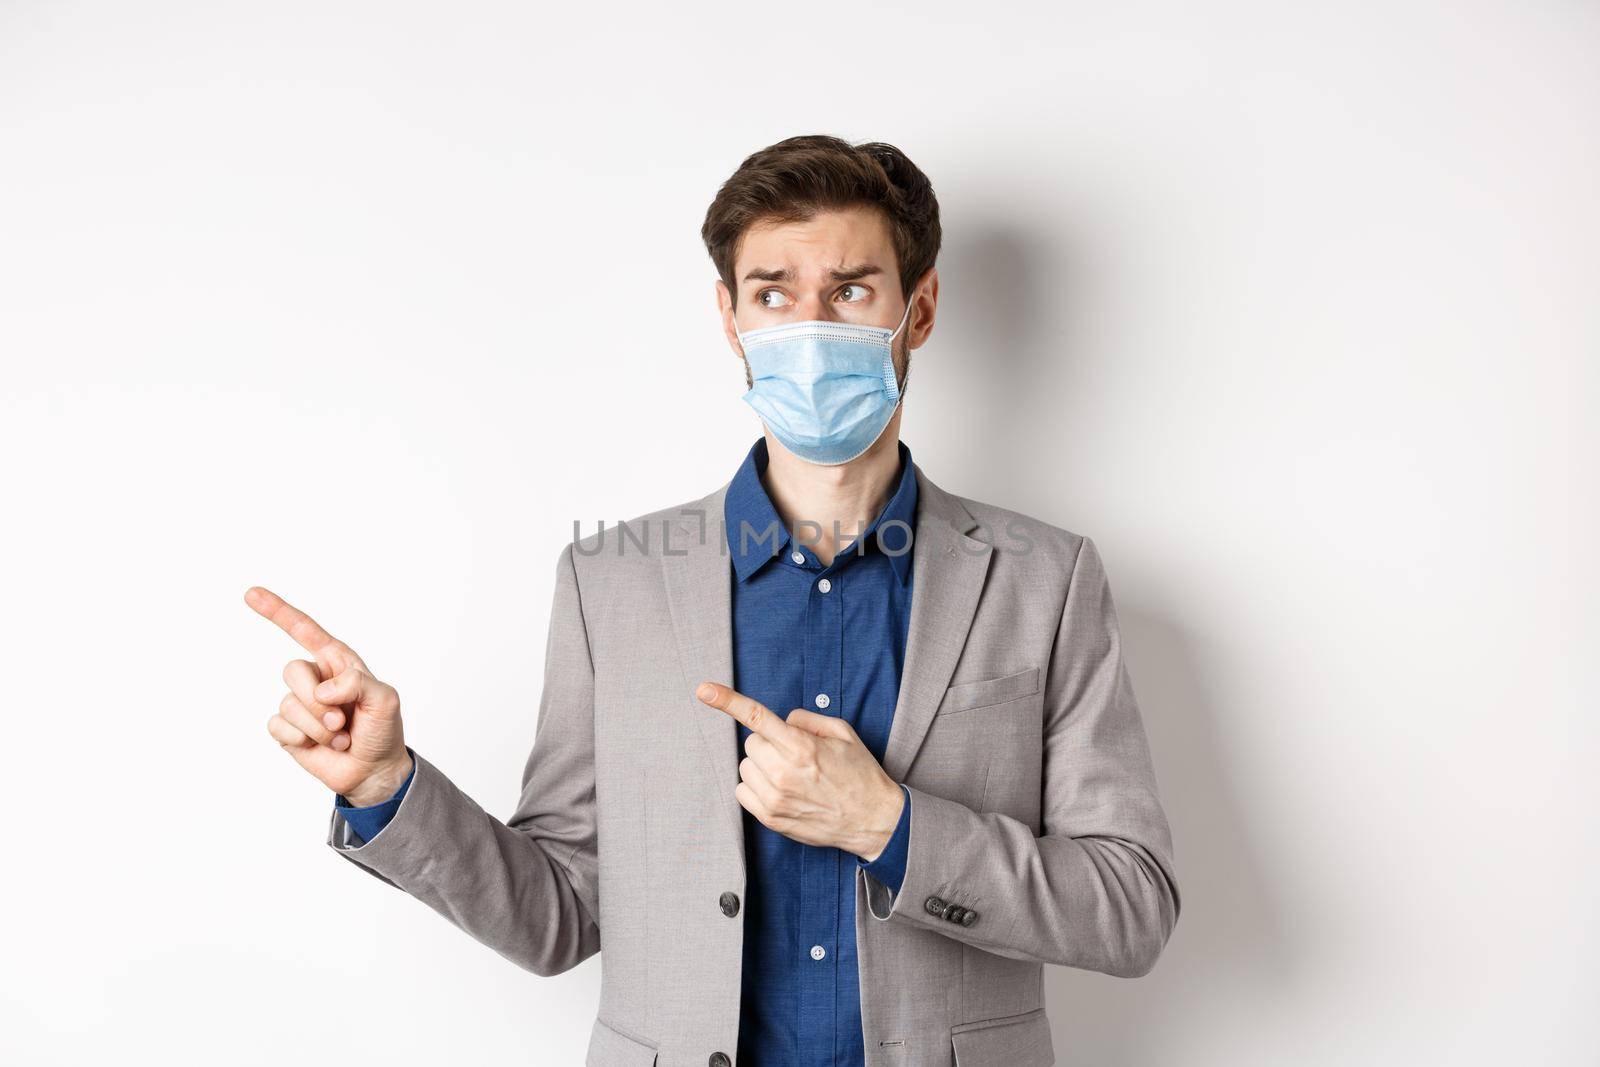 Covid-19, pandemic and business concept. Hesitant businessman in medical mask and suit looking, pointing left with doubtful face, standing on white background.